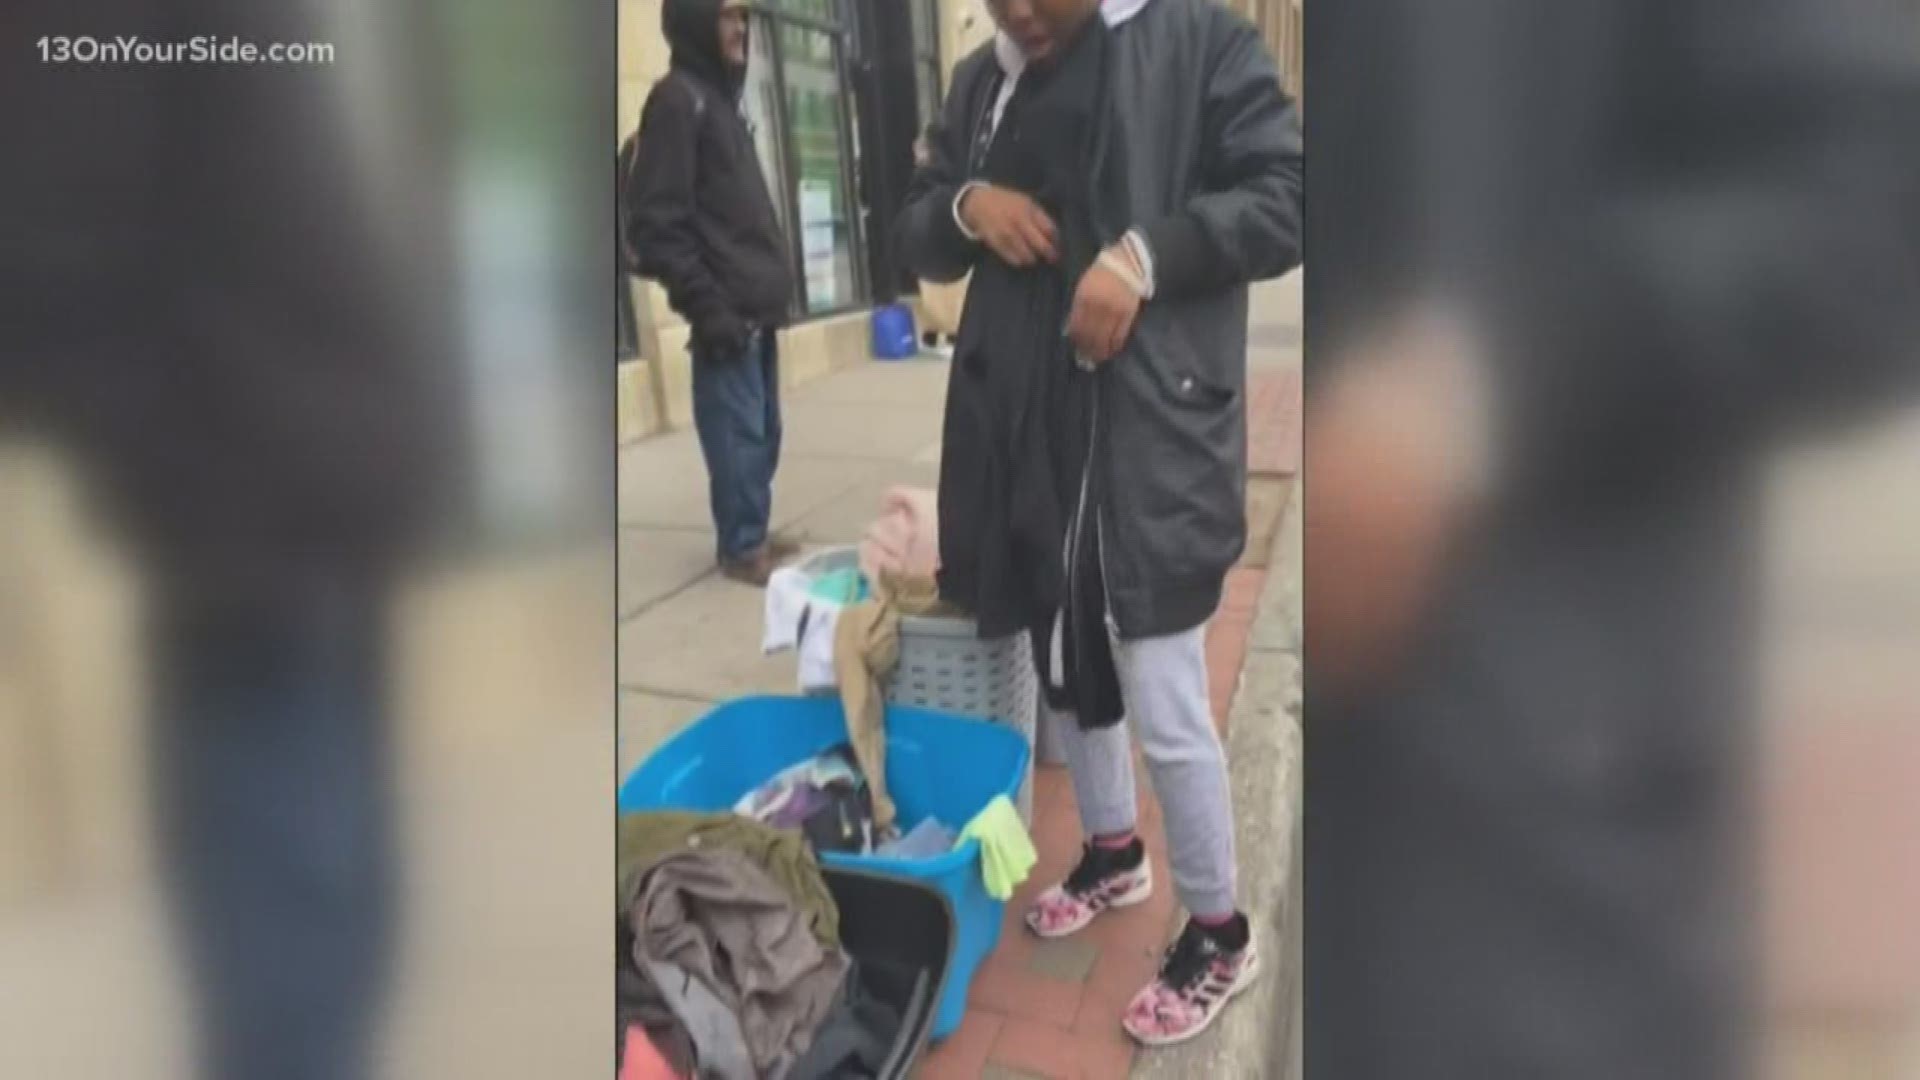 Wednesday is World Kindness Day and one Grand Rapids woman is doing more than just warming hearts -- she is warming those in need with free coats and clothing.